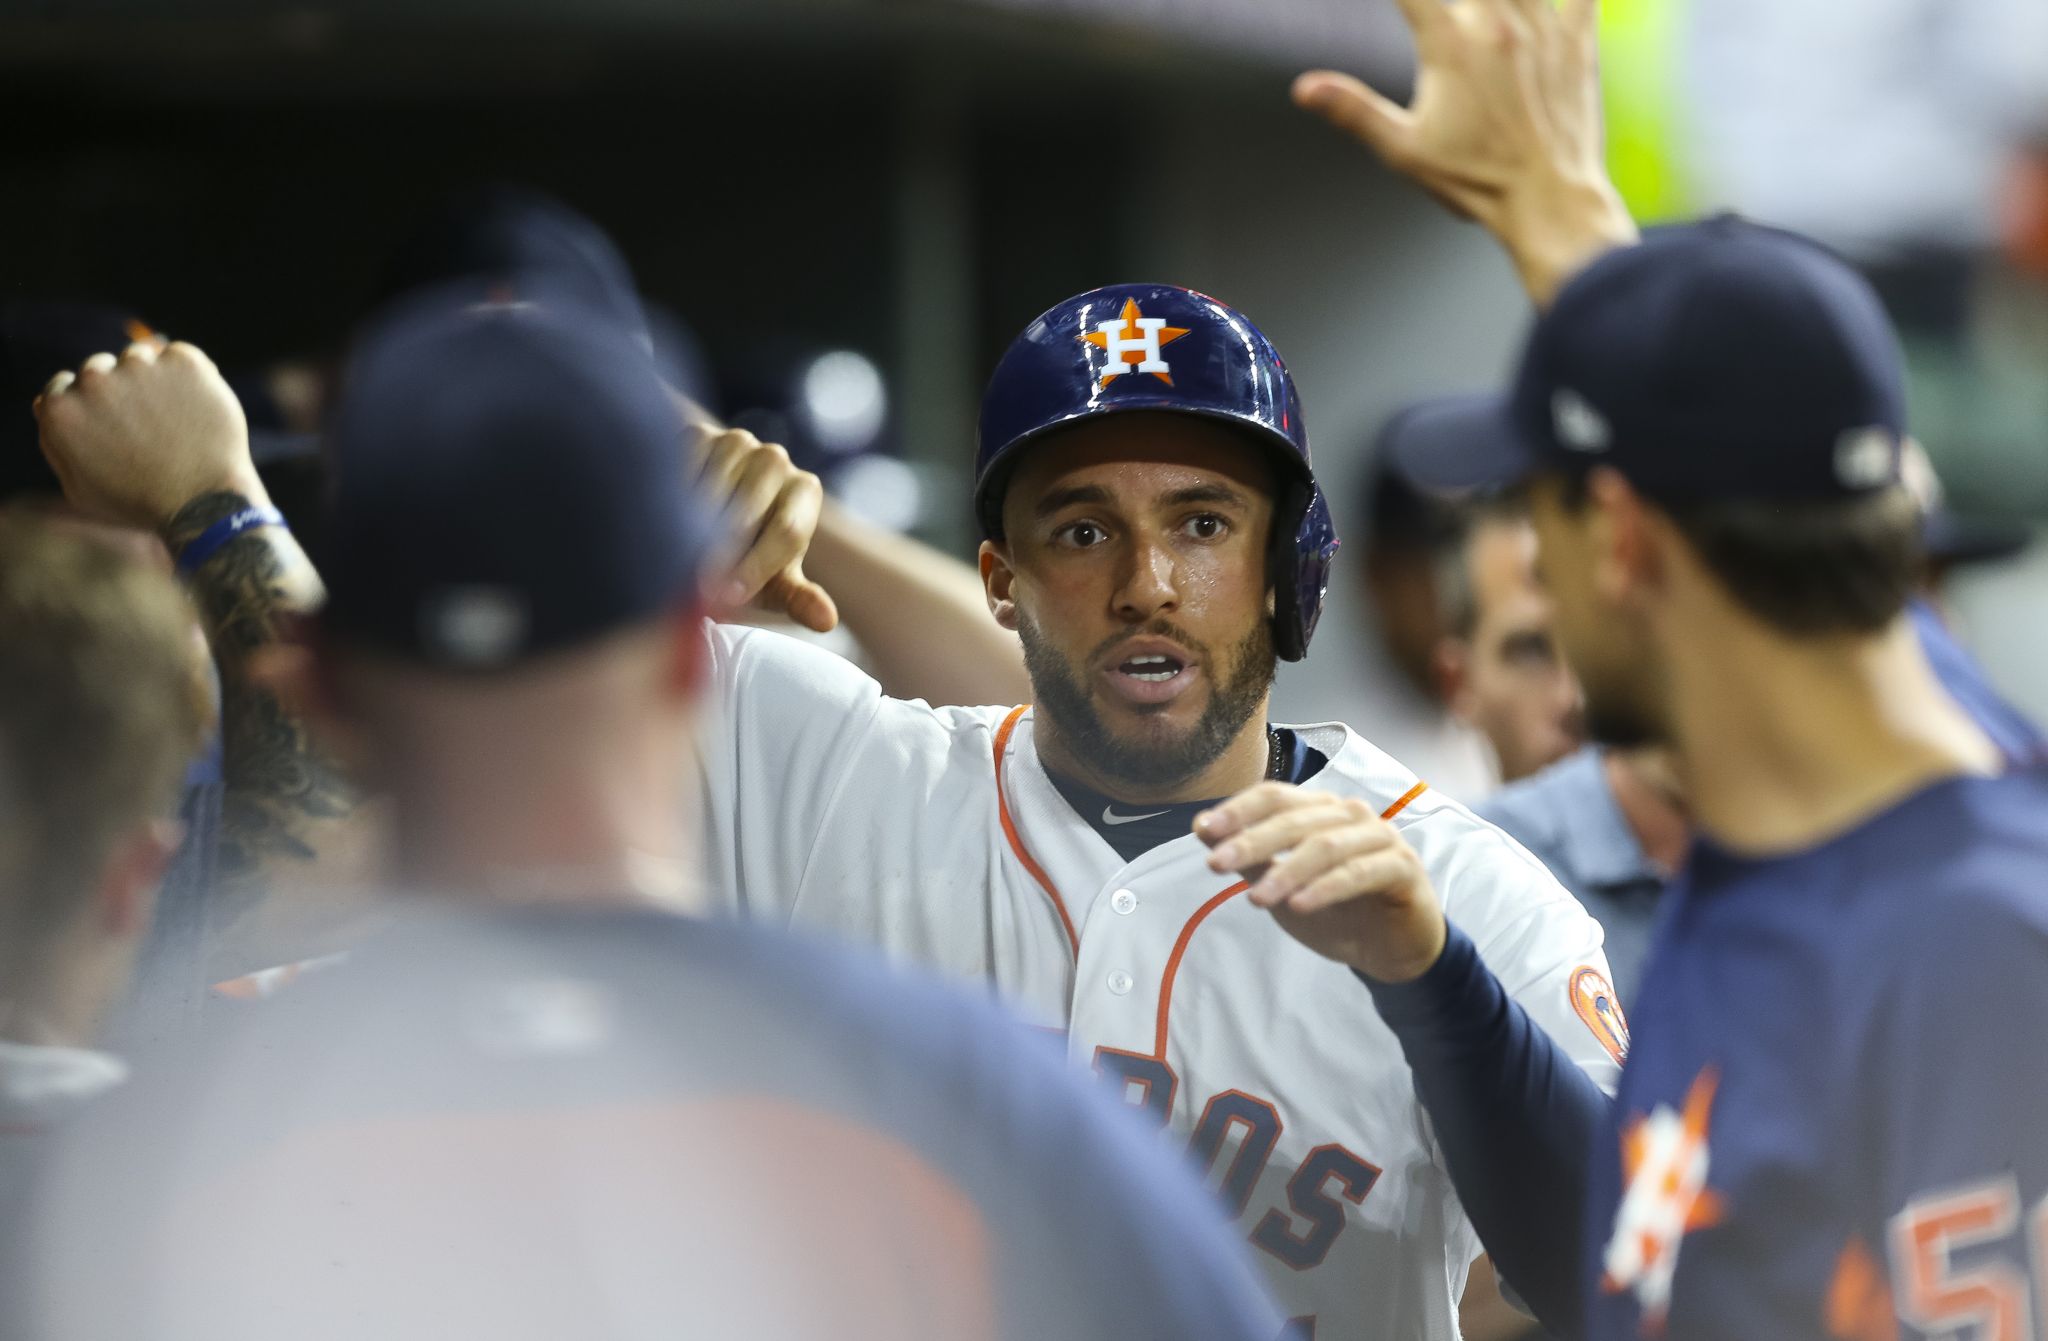 Houston Astros pull off grand-slam tribute to teammate in hysterical  dress-up day - CultureMap Houston